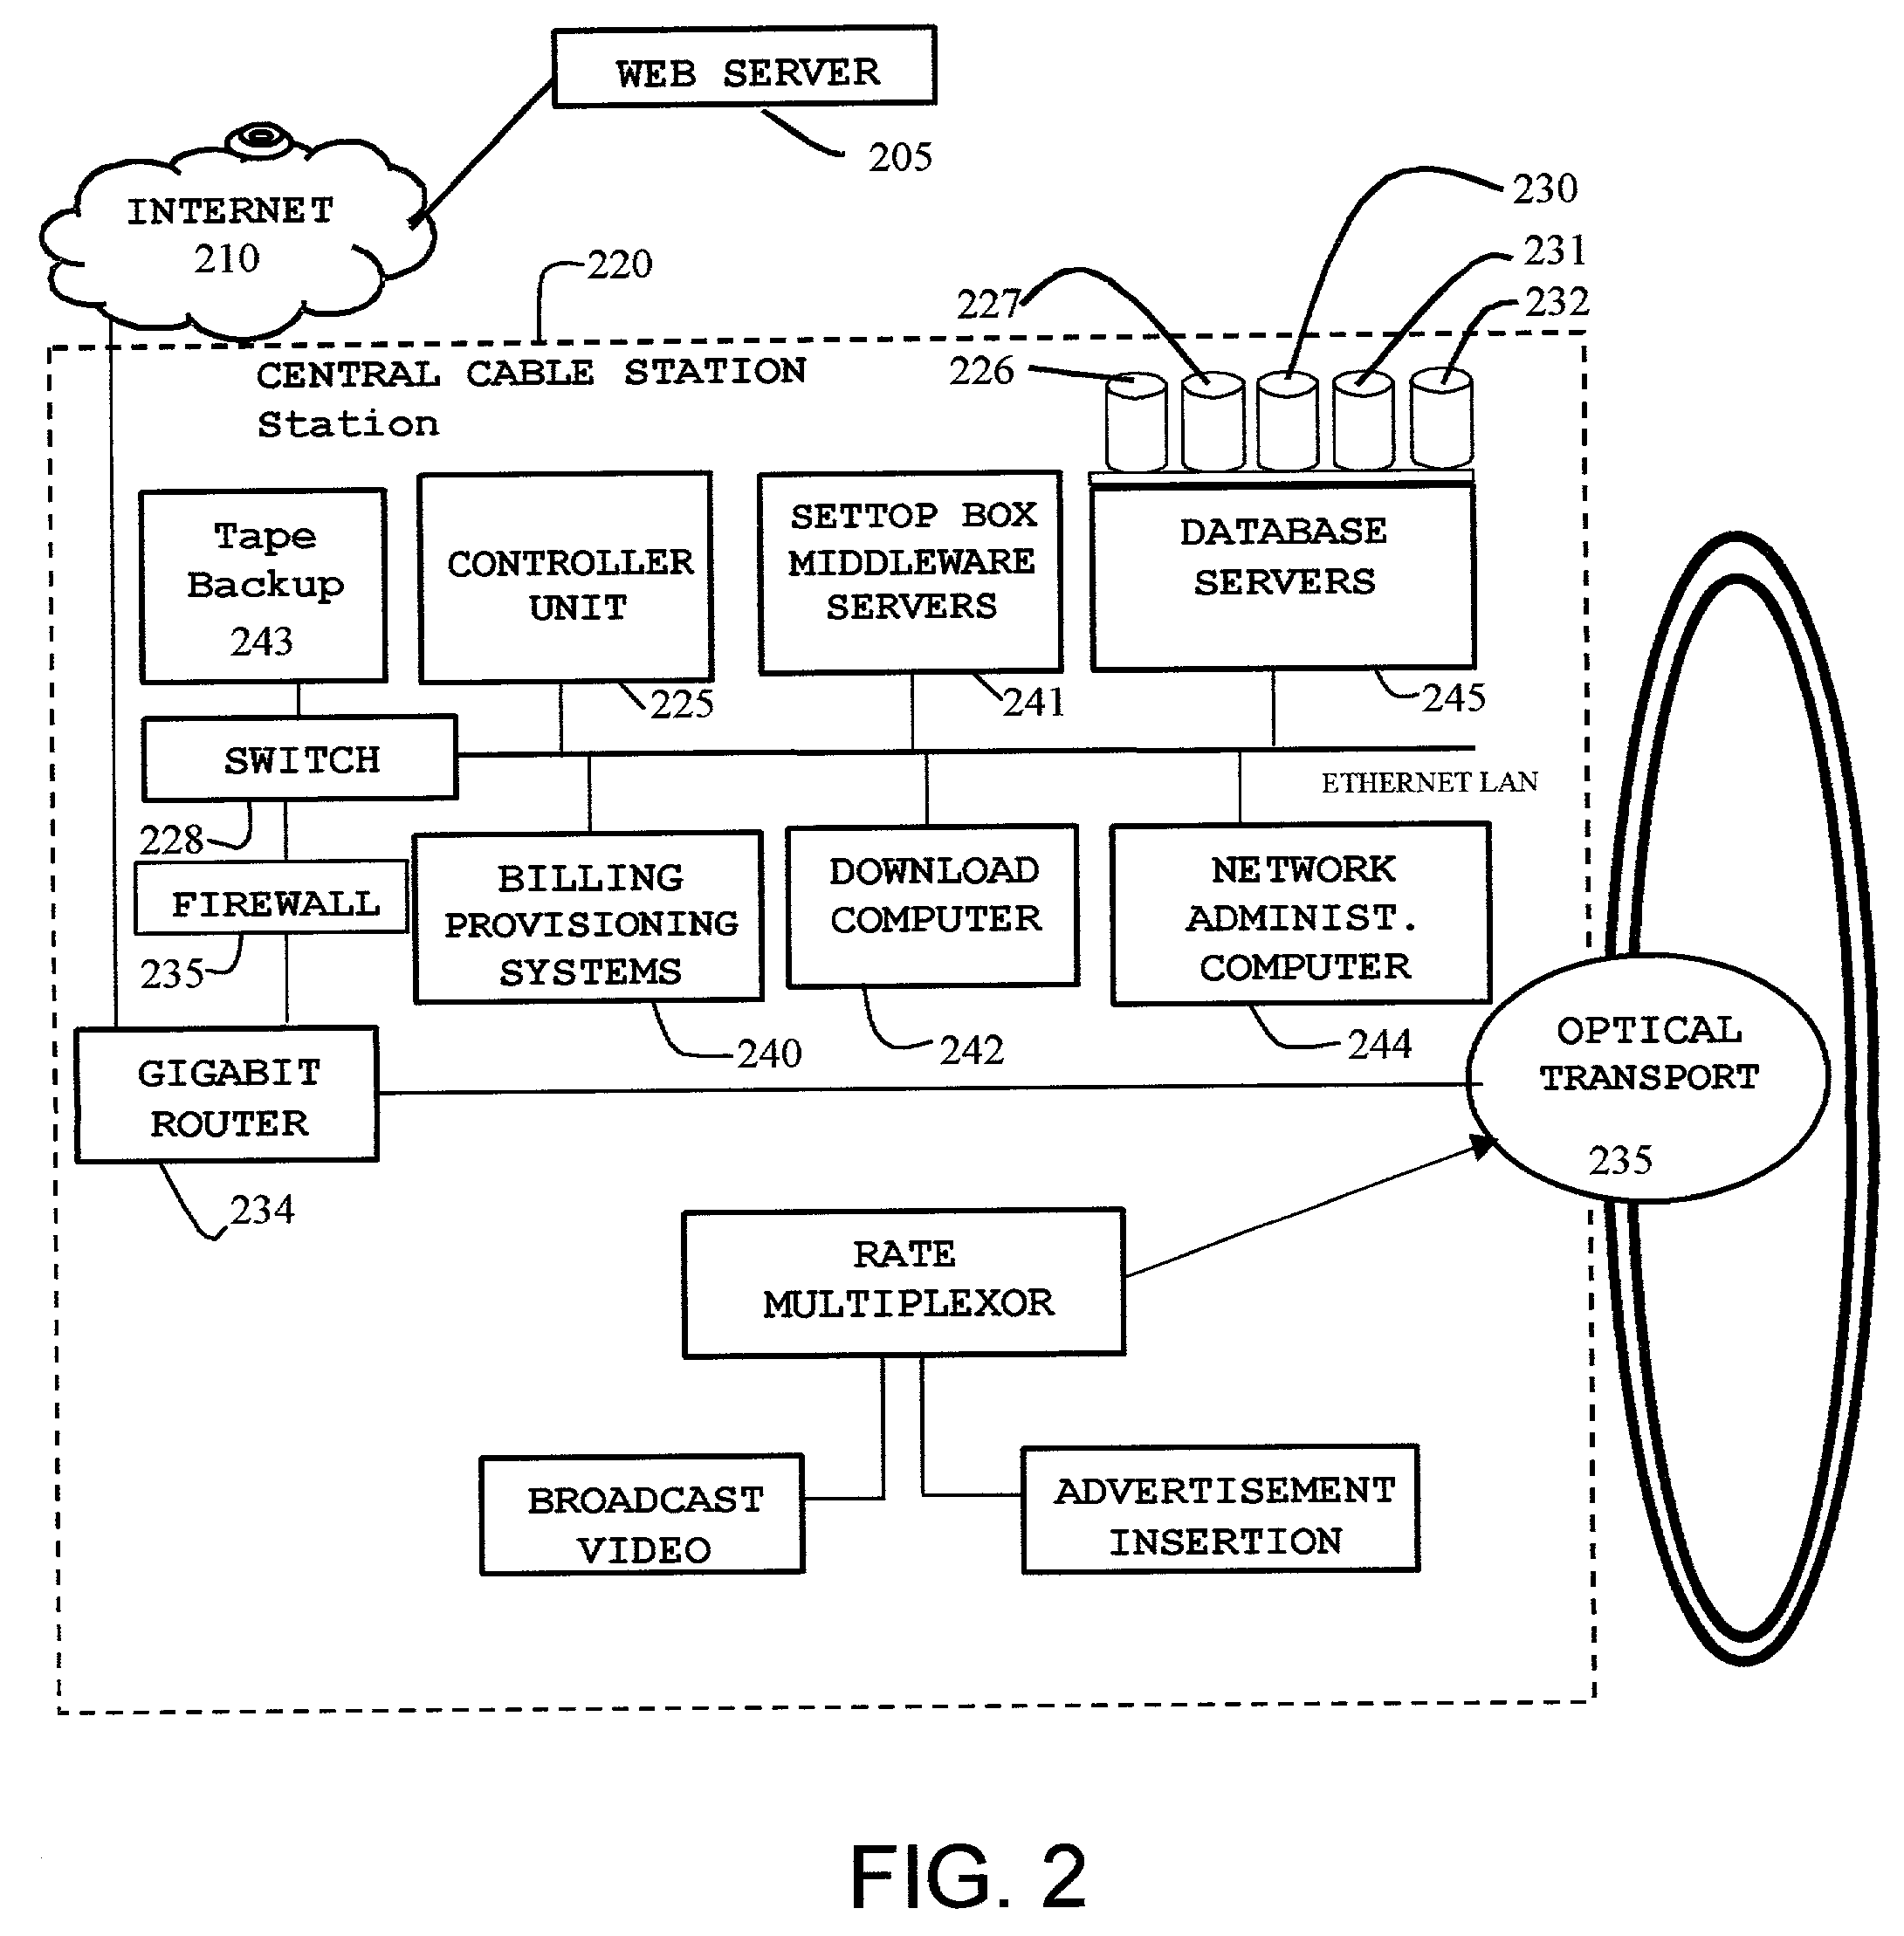 System and method for distributed storage and presentation of multimedia in a cable network environment